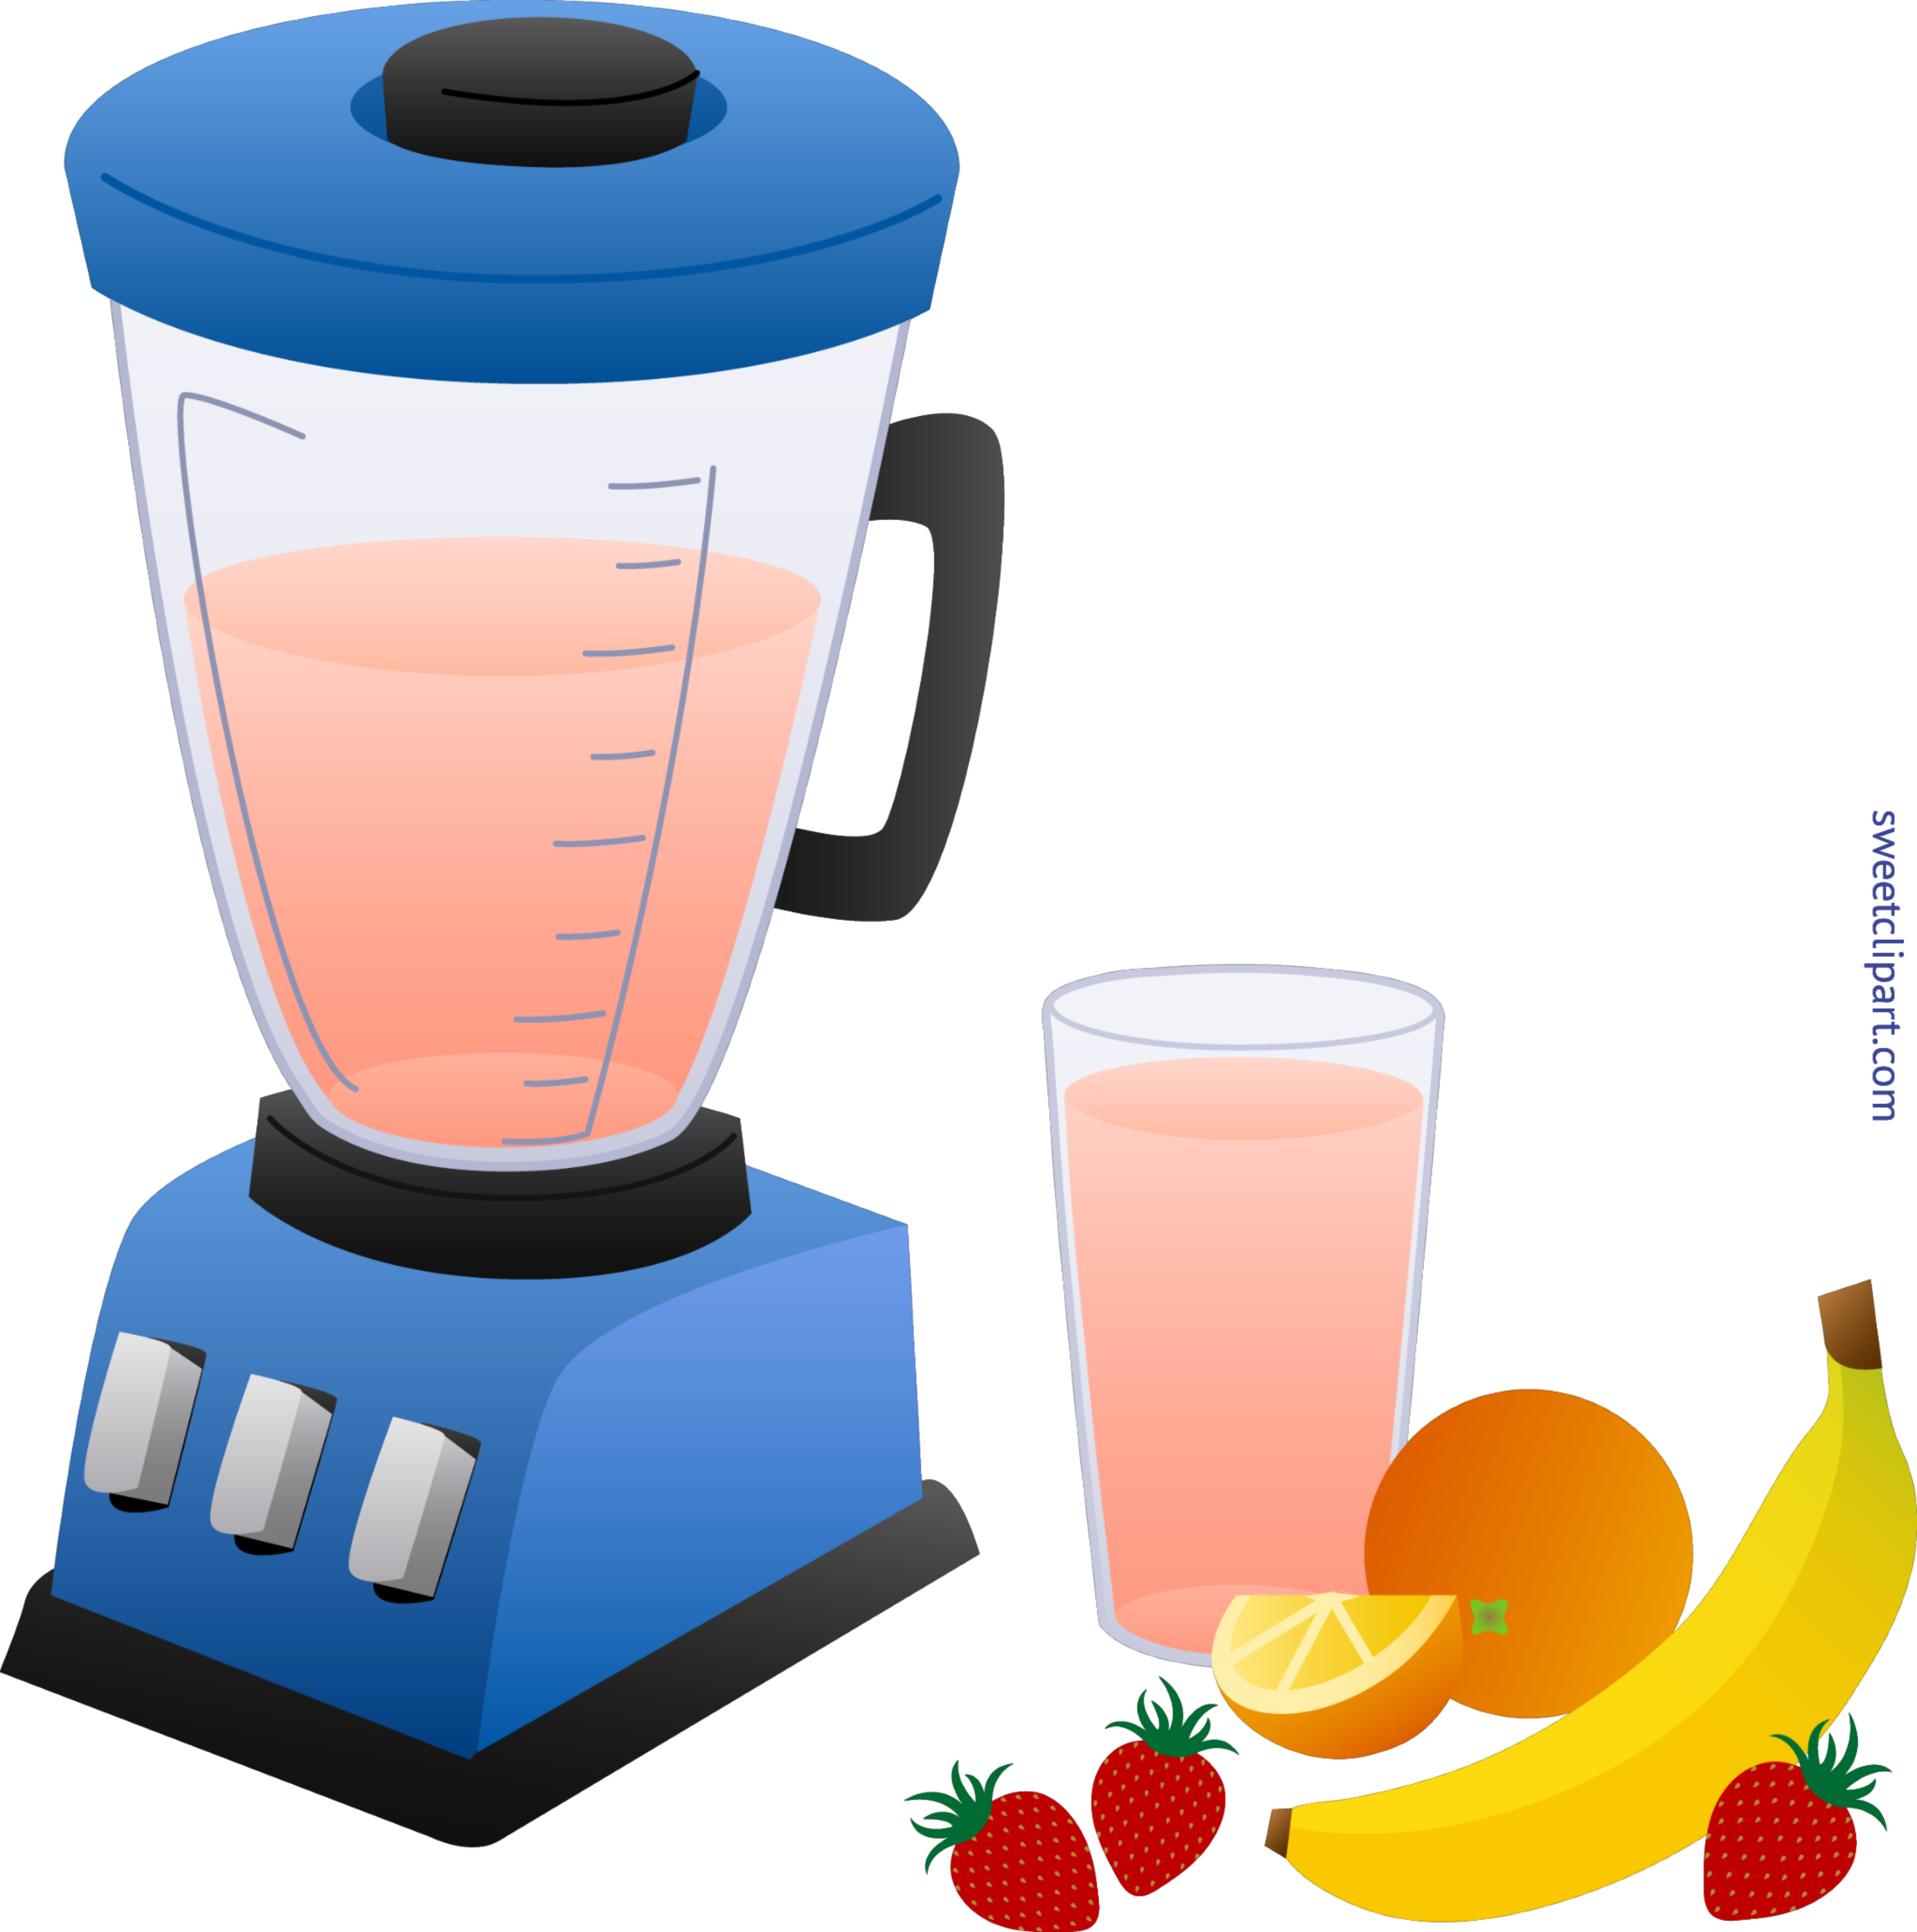 Blender clipart thing. And fruit smoothie clip